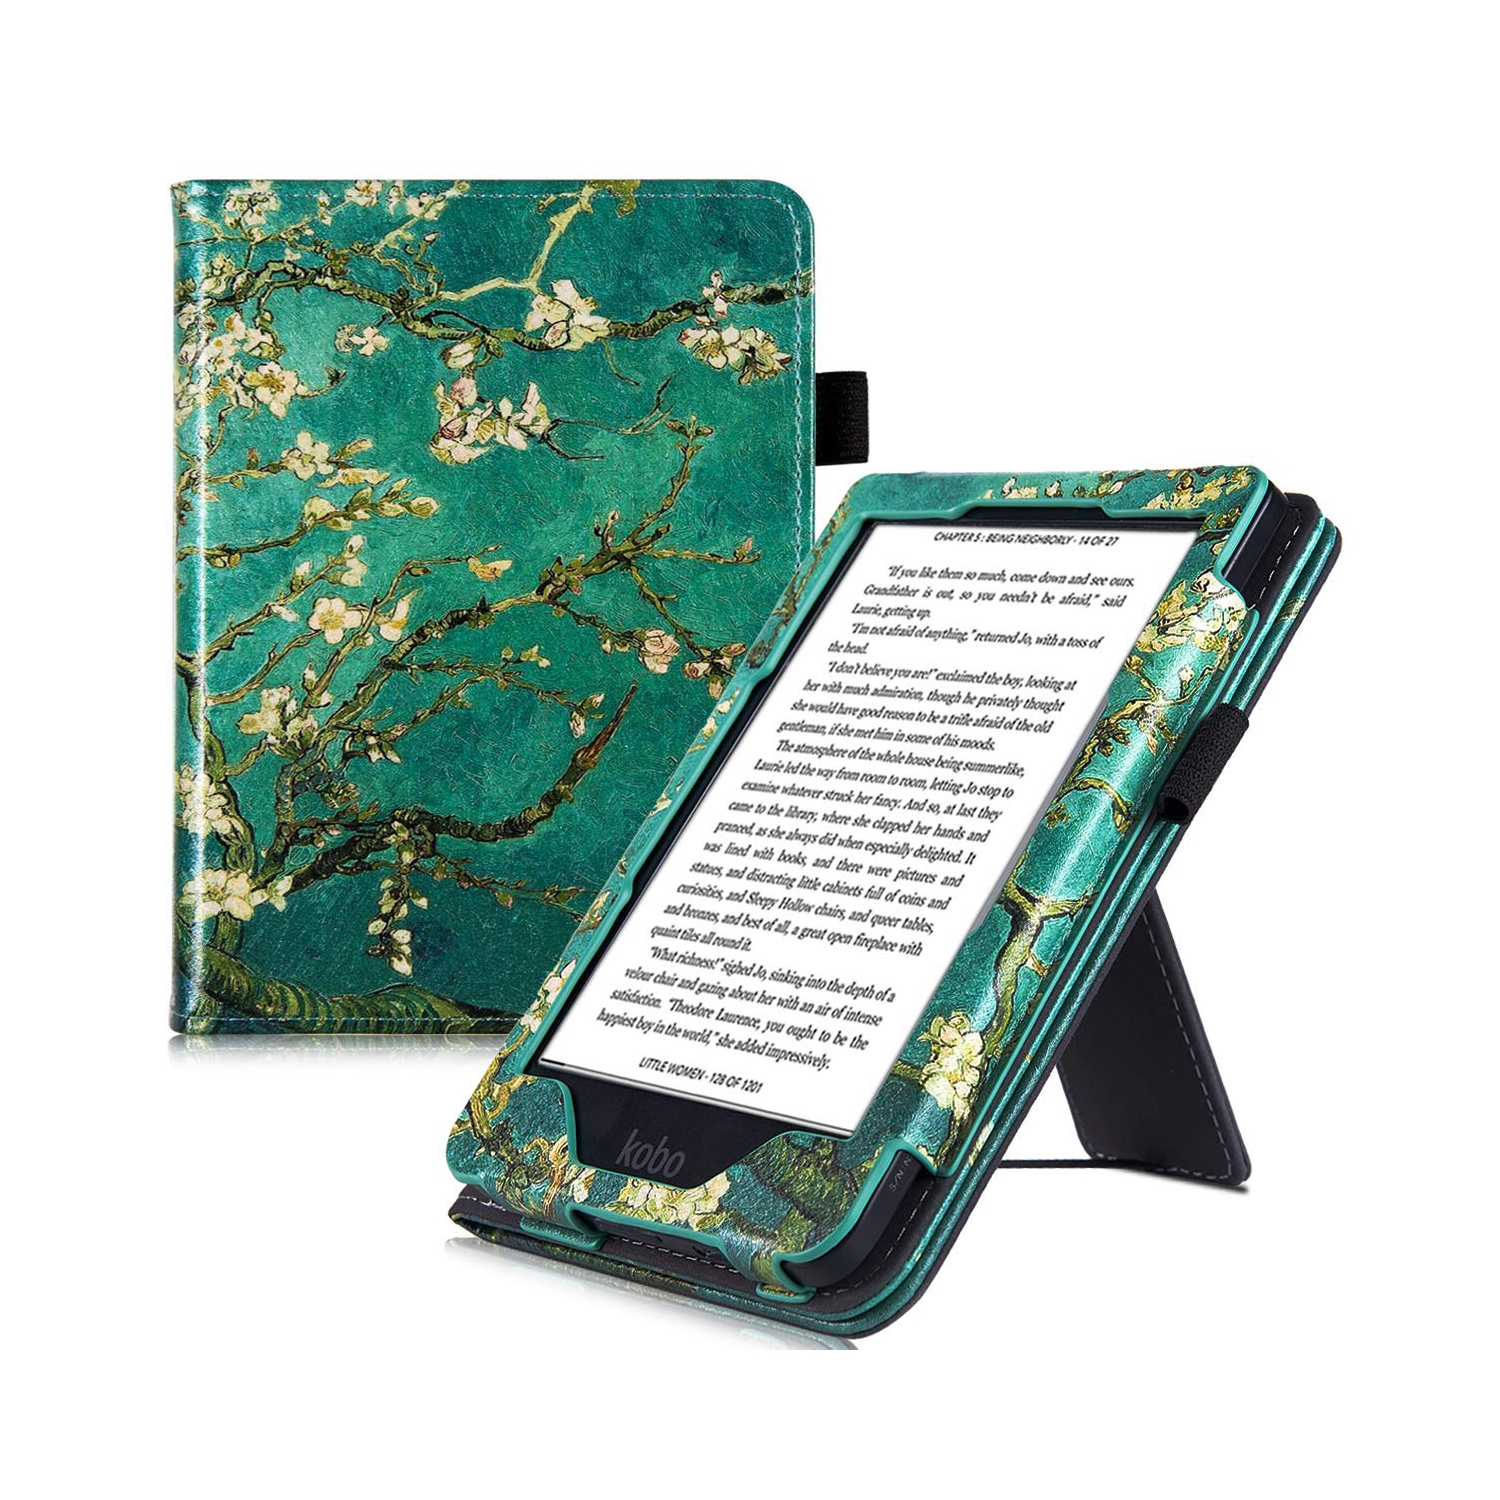 PU e-Reader Cover Star Map White/Dark Blue kwmobile Case Compatible with Kobo Nia 